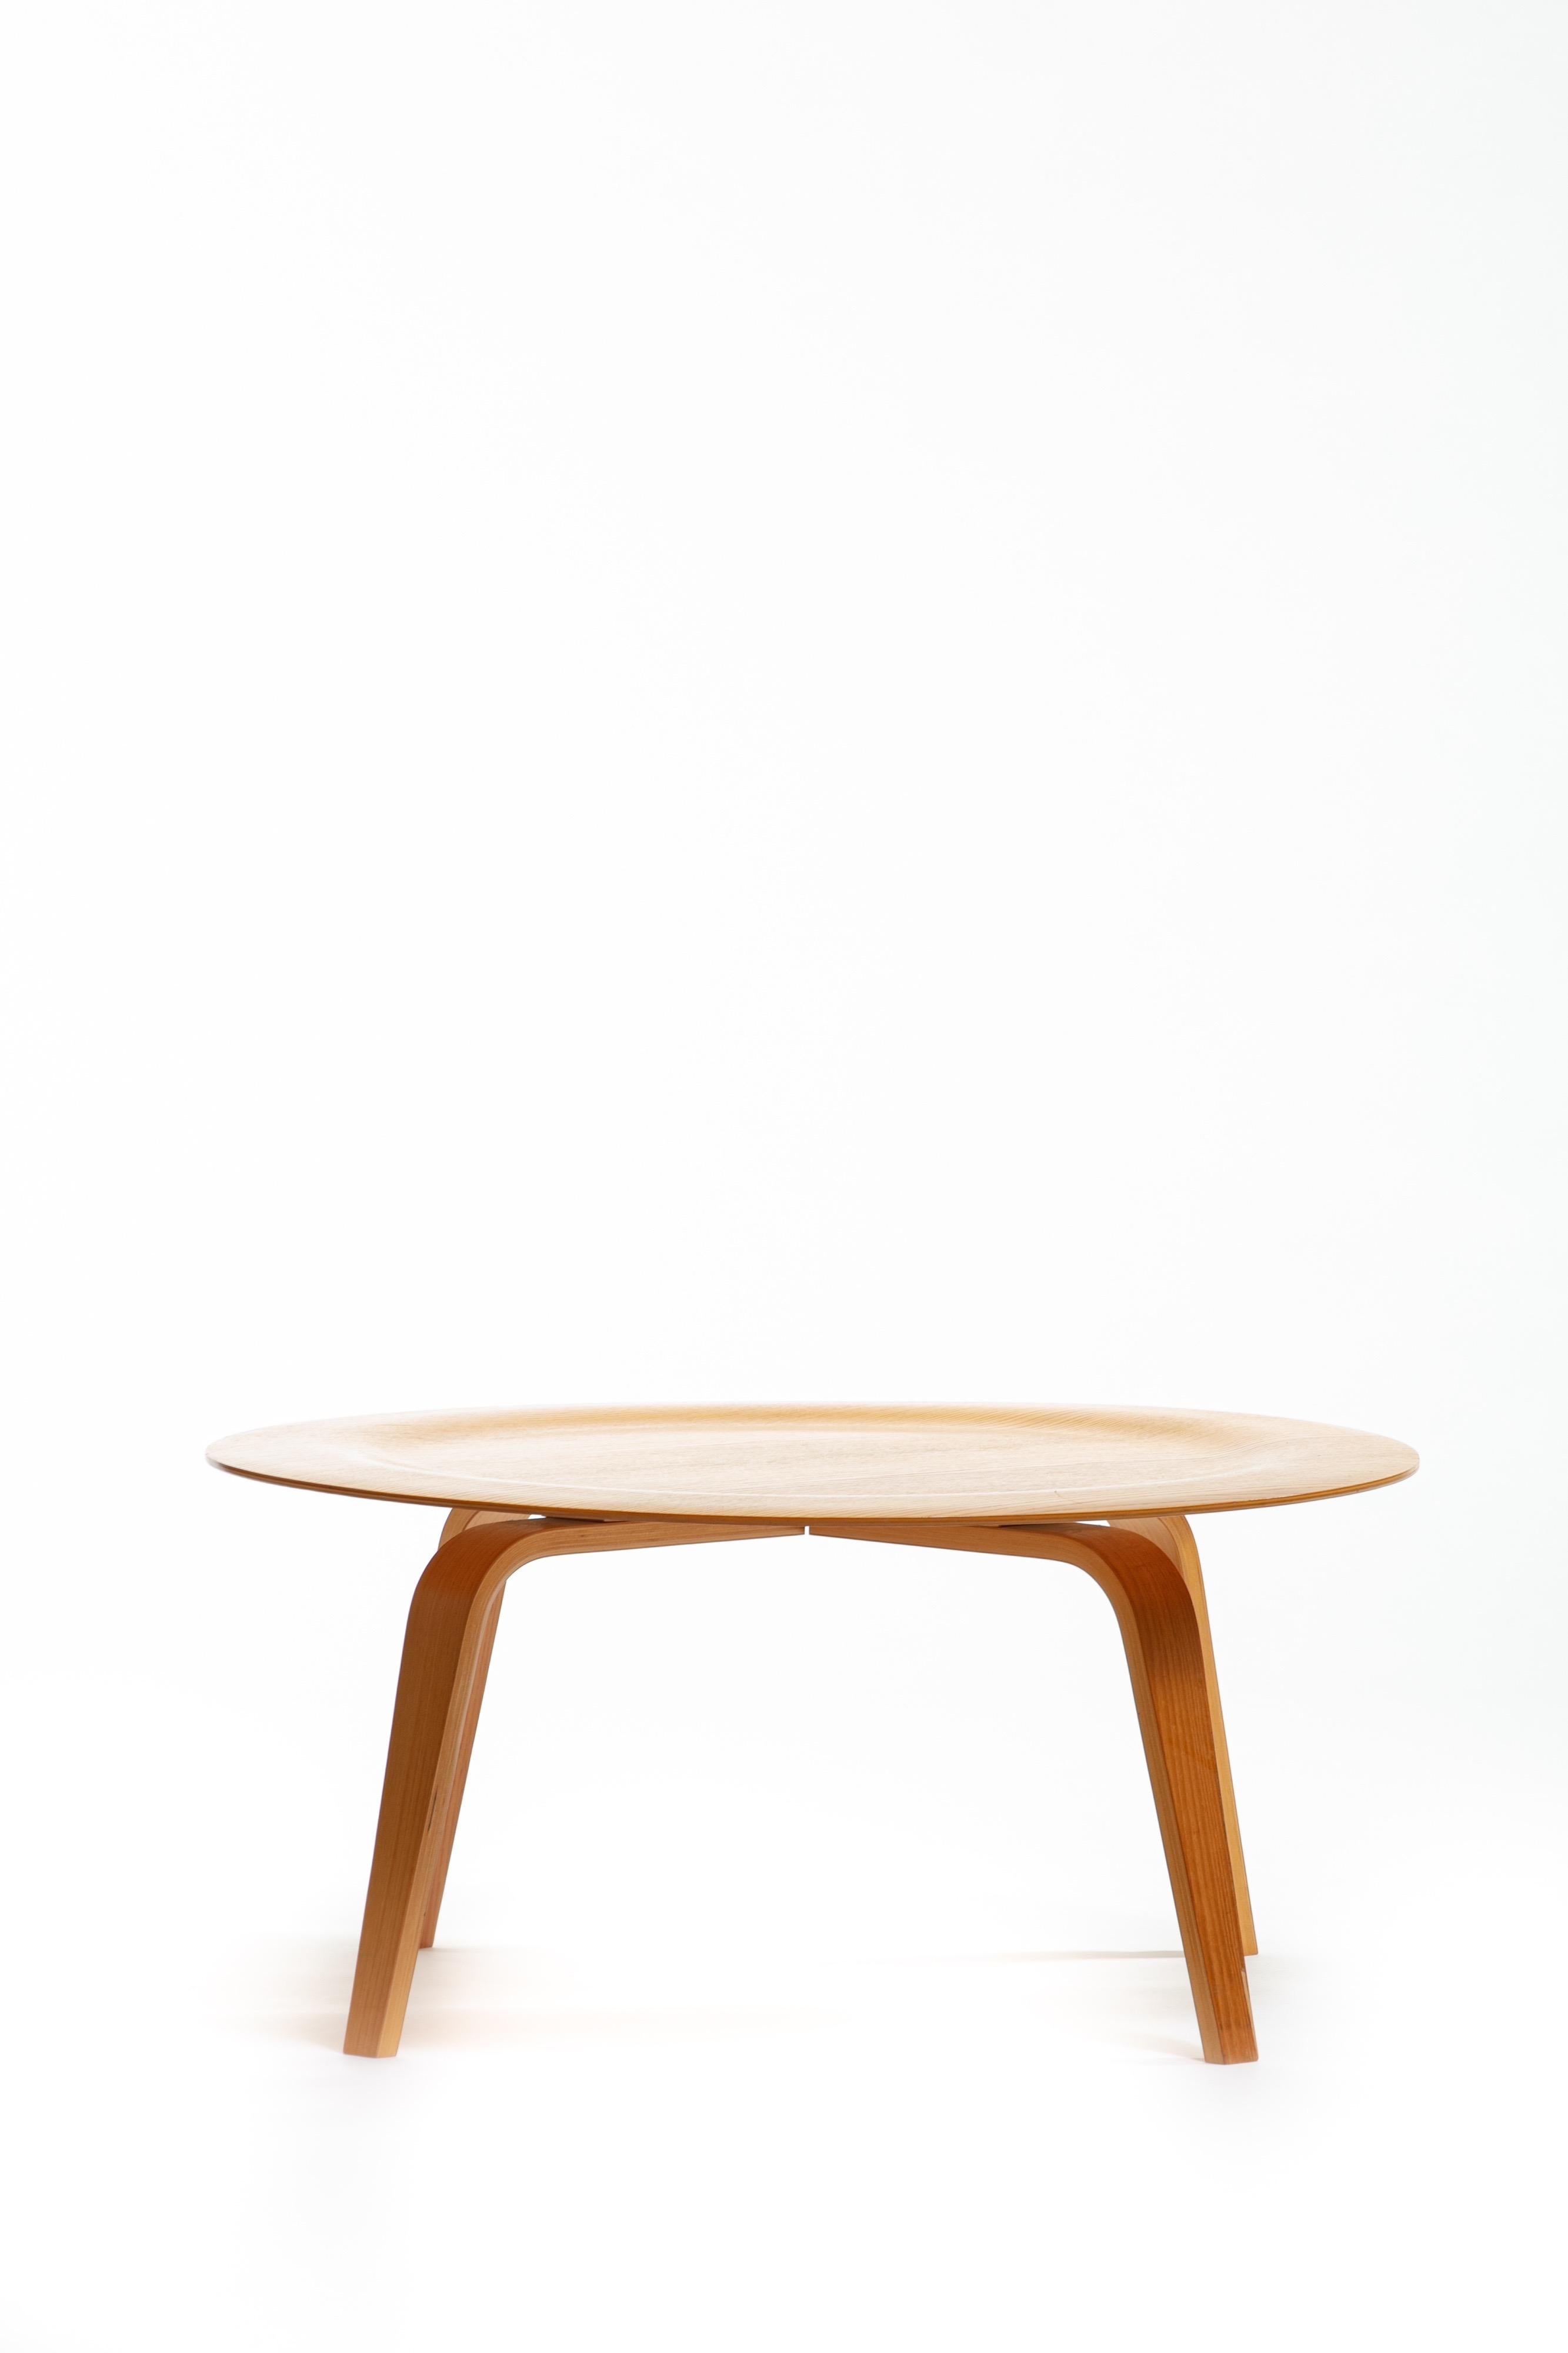 American Charles and Ray Eames CTW 'Coffee Table Wood' for Herman Miller For Sale